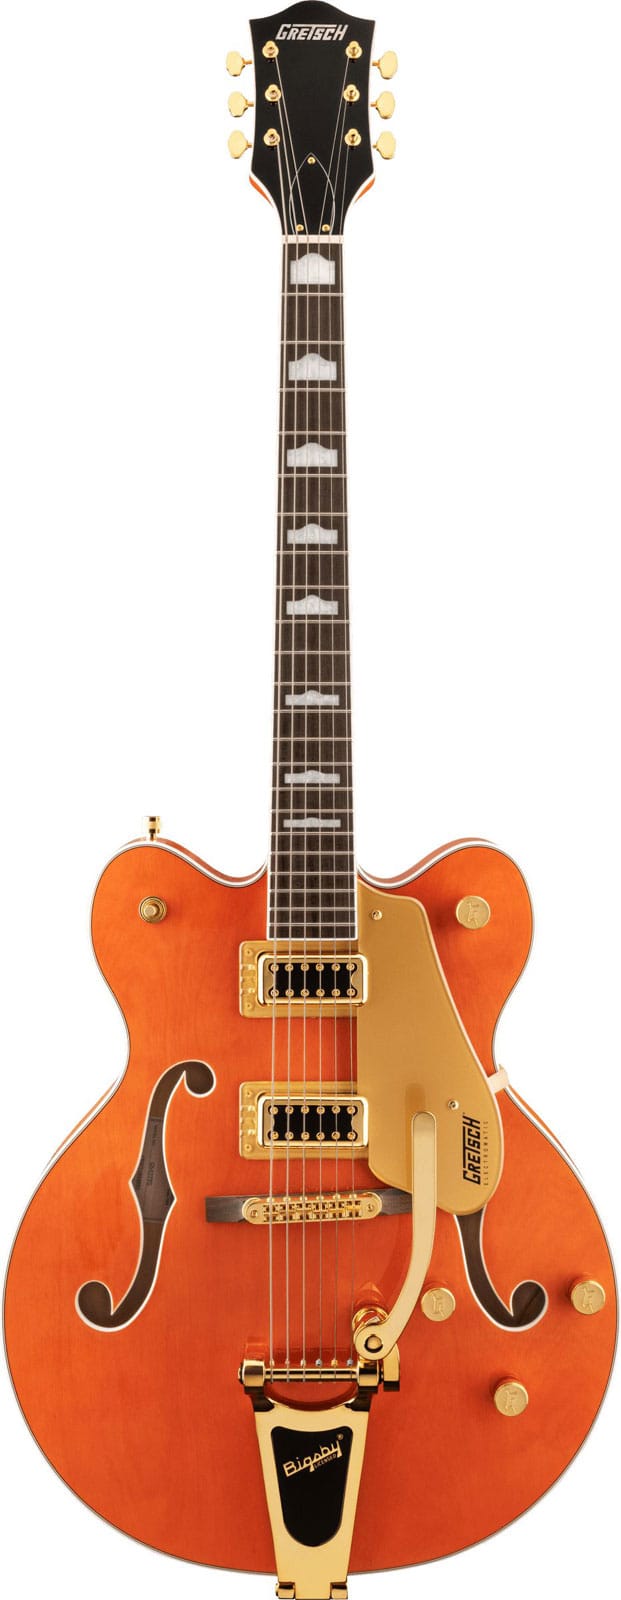 GRETSCH GUITARS G5422TG ELECTROMATIC CLASSIC HOLLOW BODY DOUBLE-CUT WITH BIGSBY AND GOLD HARDWARE LRL ORANGE STAIN